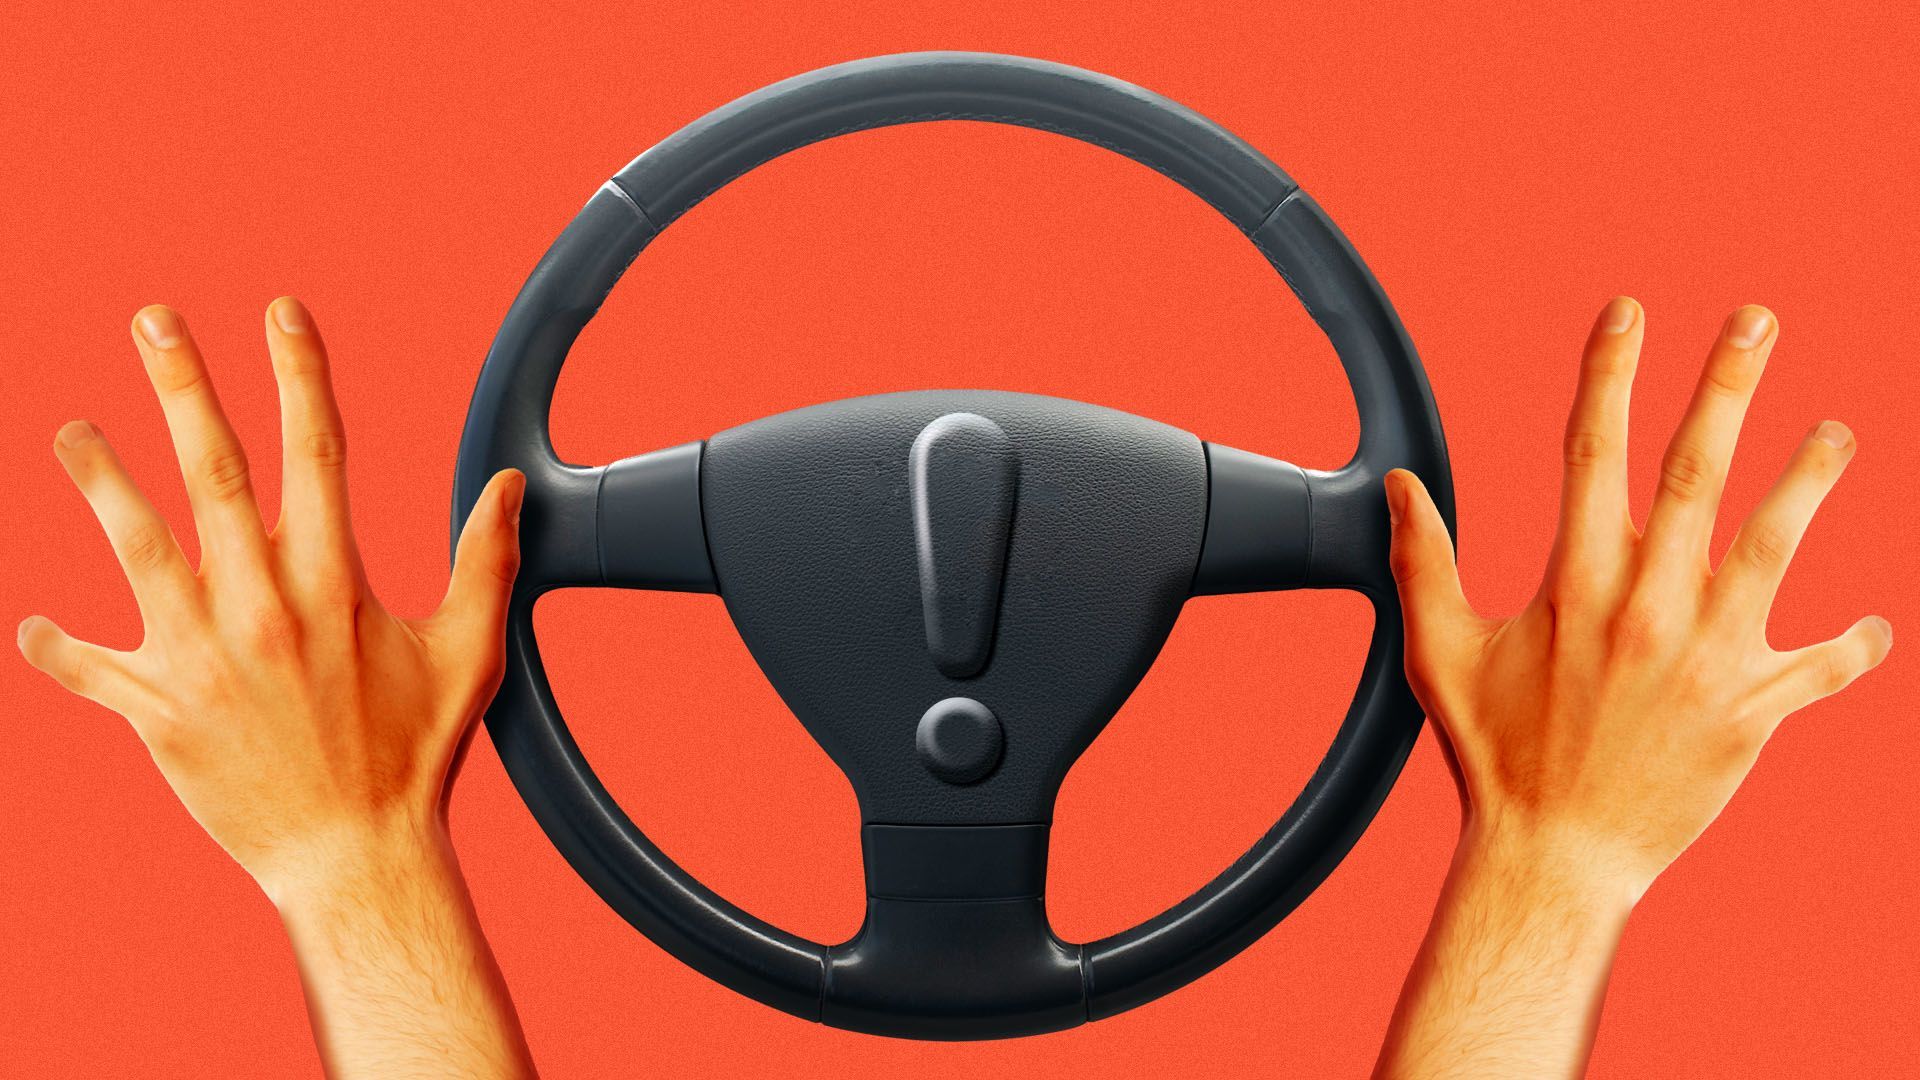 Illustration of a steering wheel with an exclamation point in the center with hands on either side